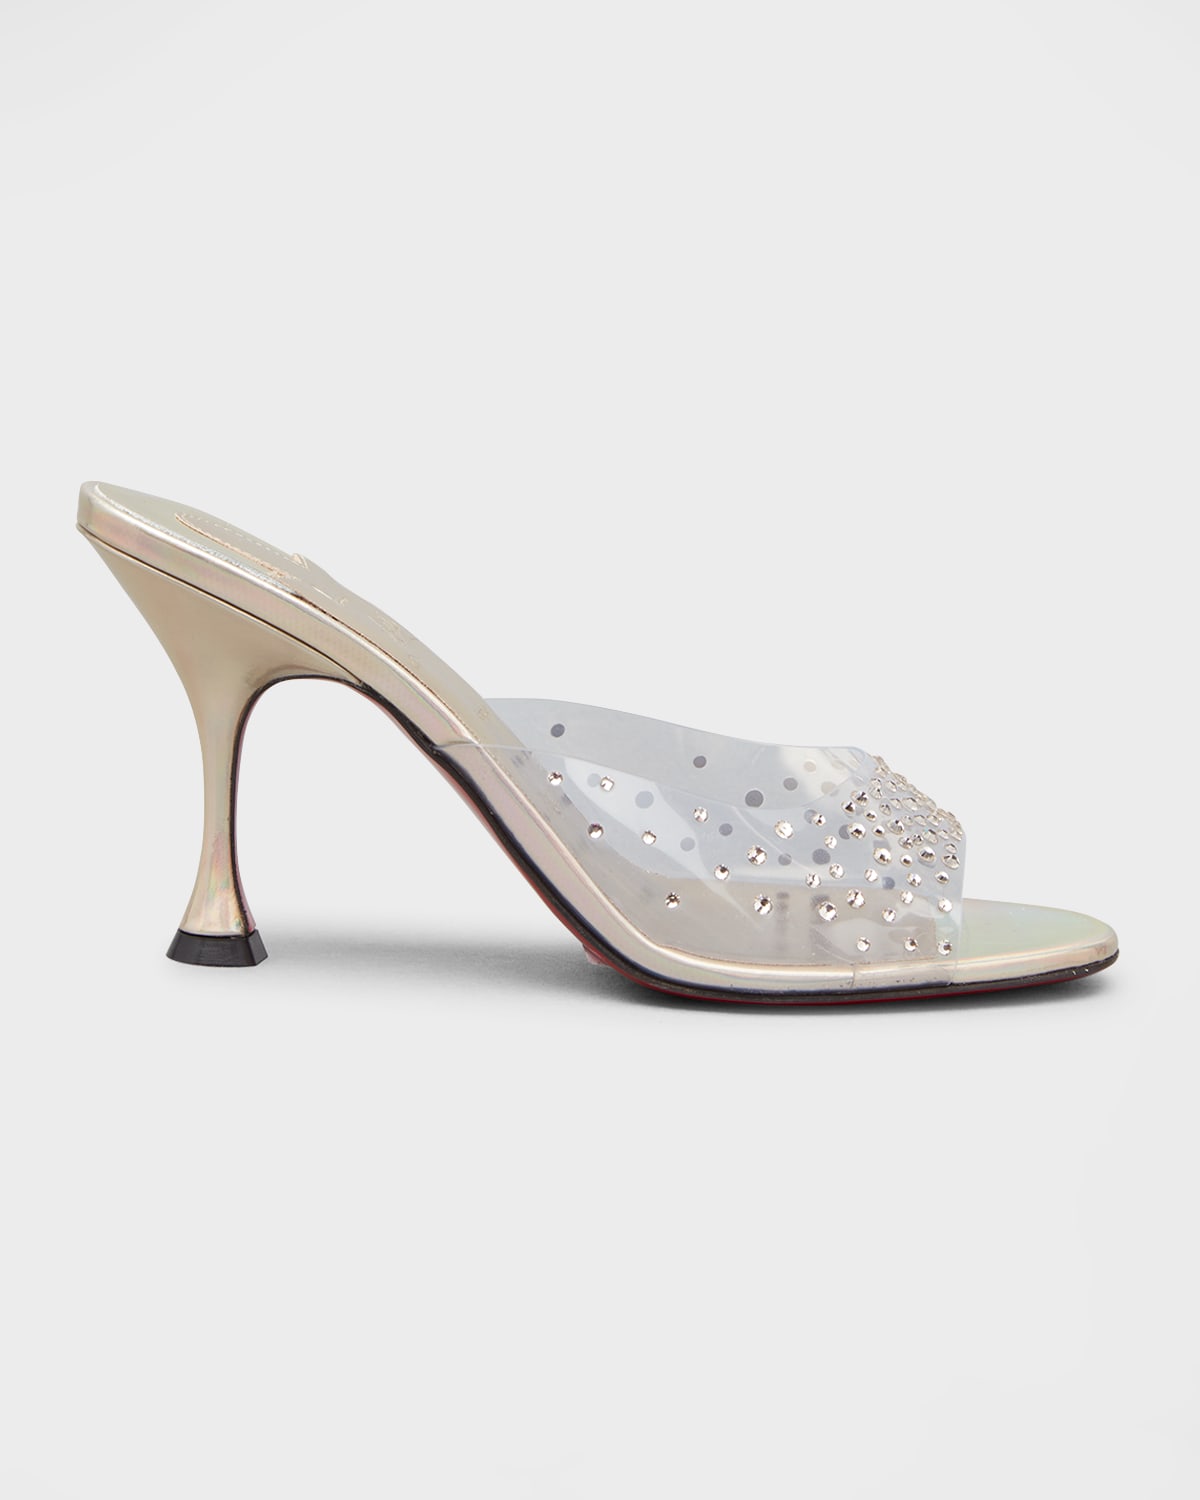 Christian Louboutin Degramule Strass Clear Stiletto Sandals In Neutrals